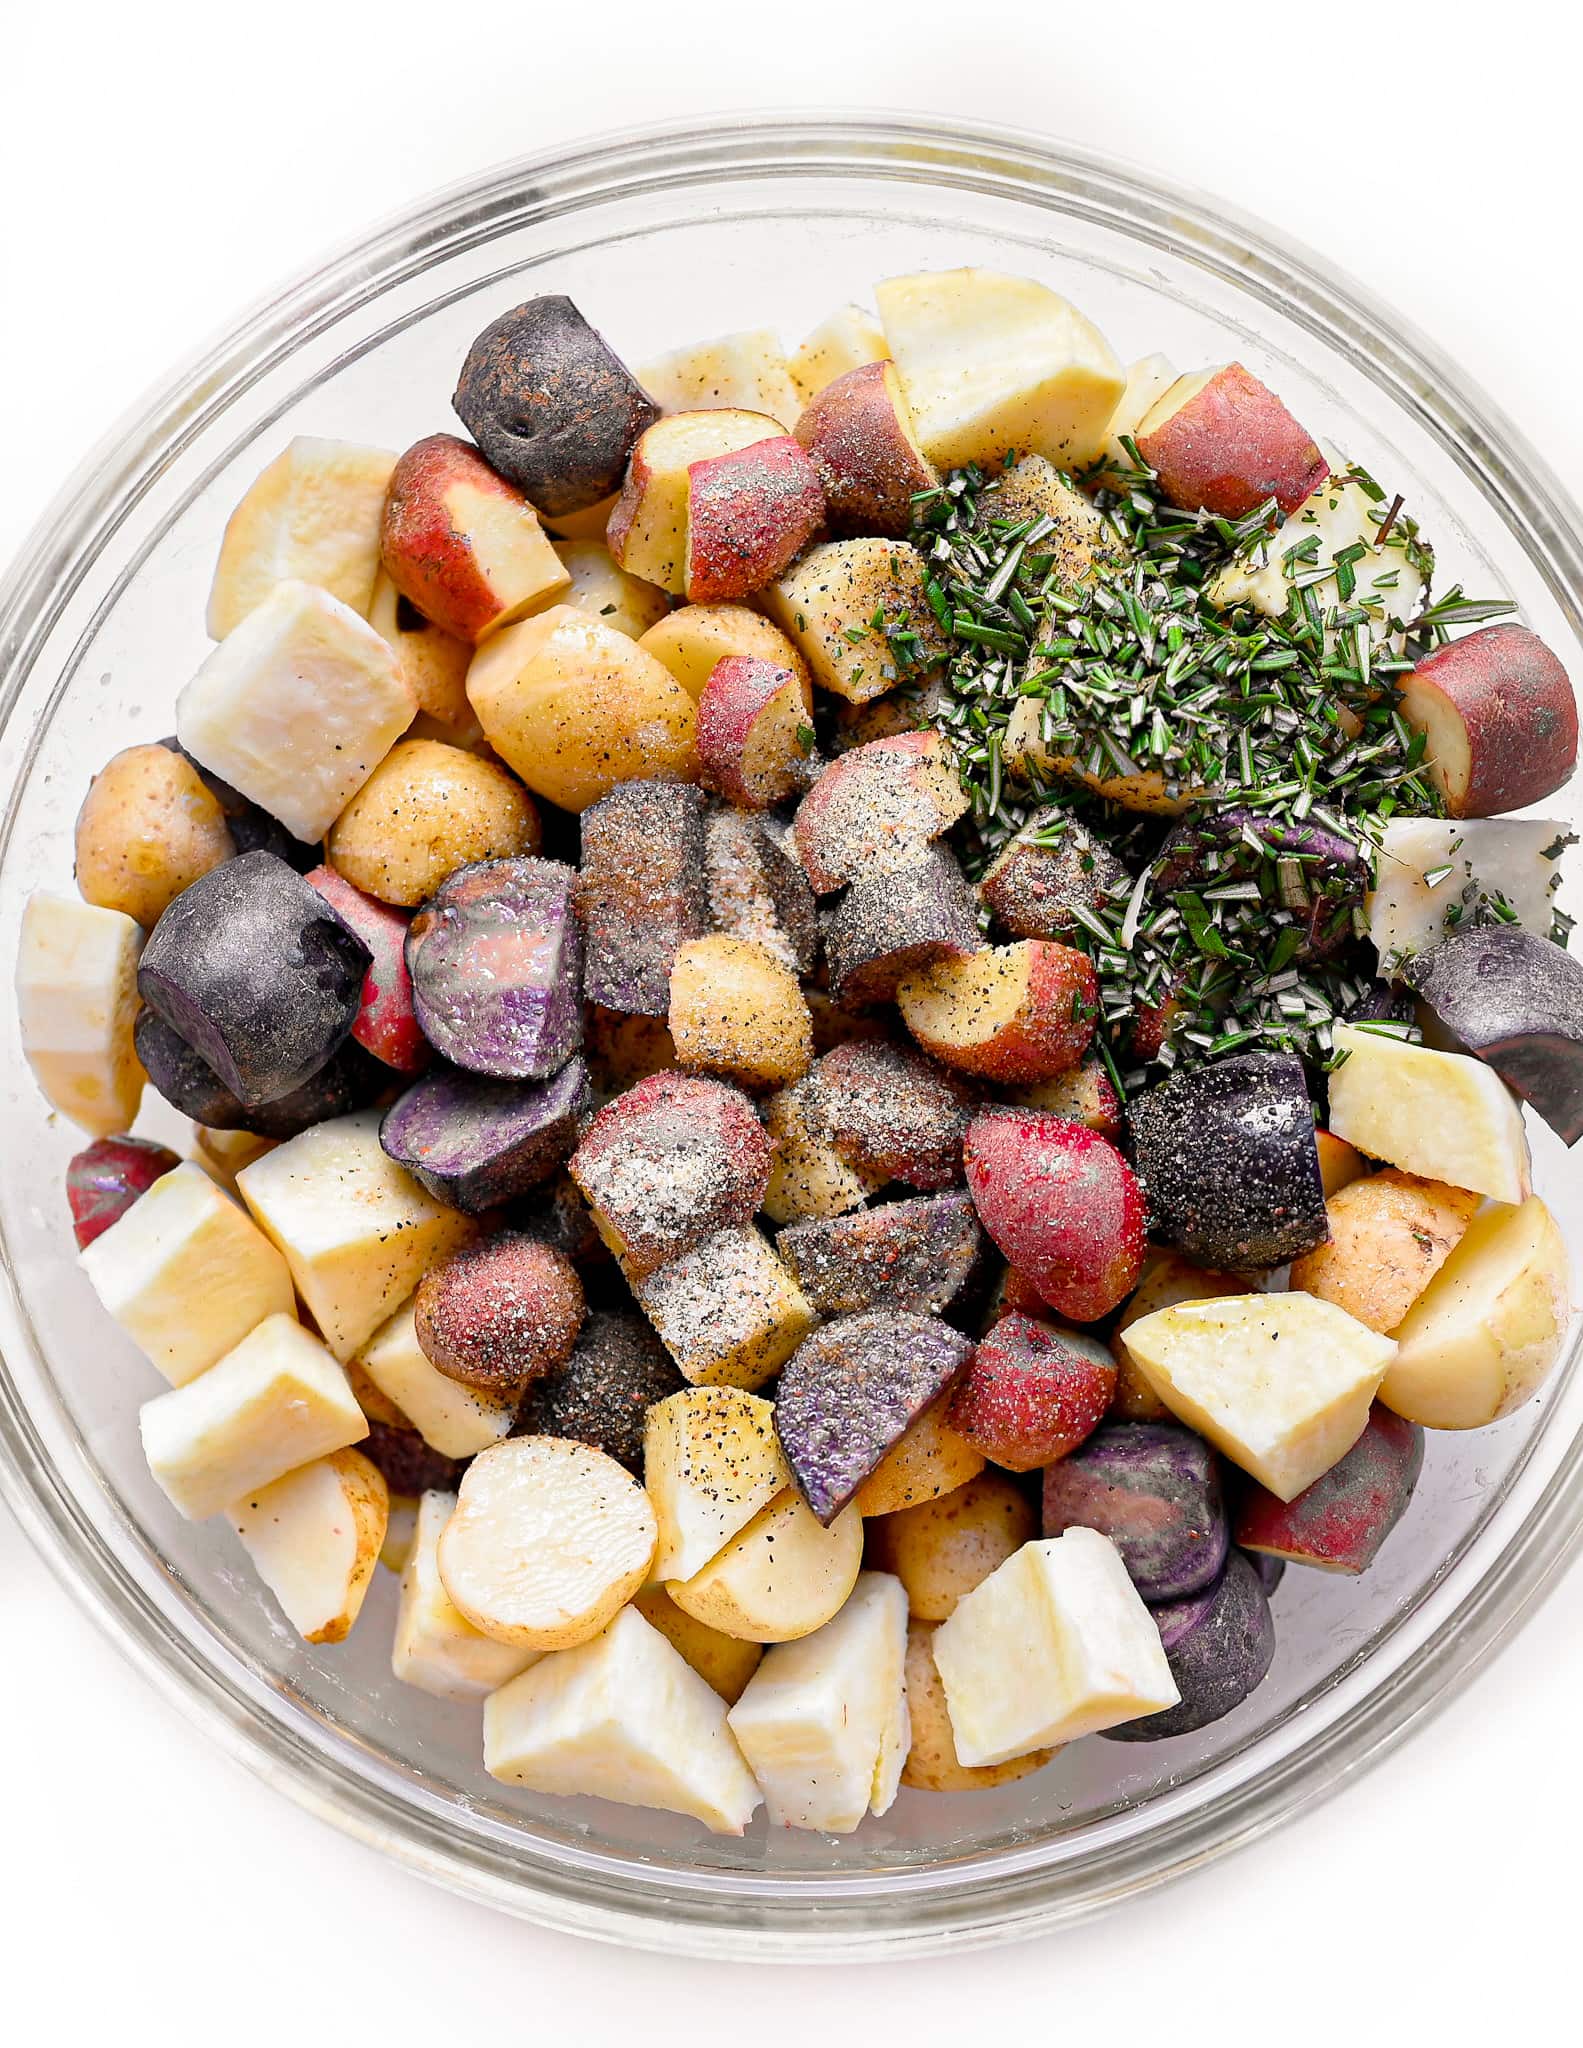 Bowl of uncooked mixed colored potatoes. Fresh seasoning and rosemary is on the potatoes.